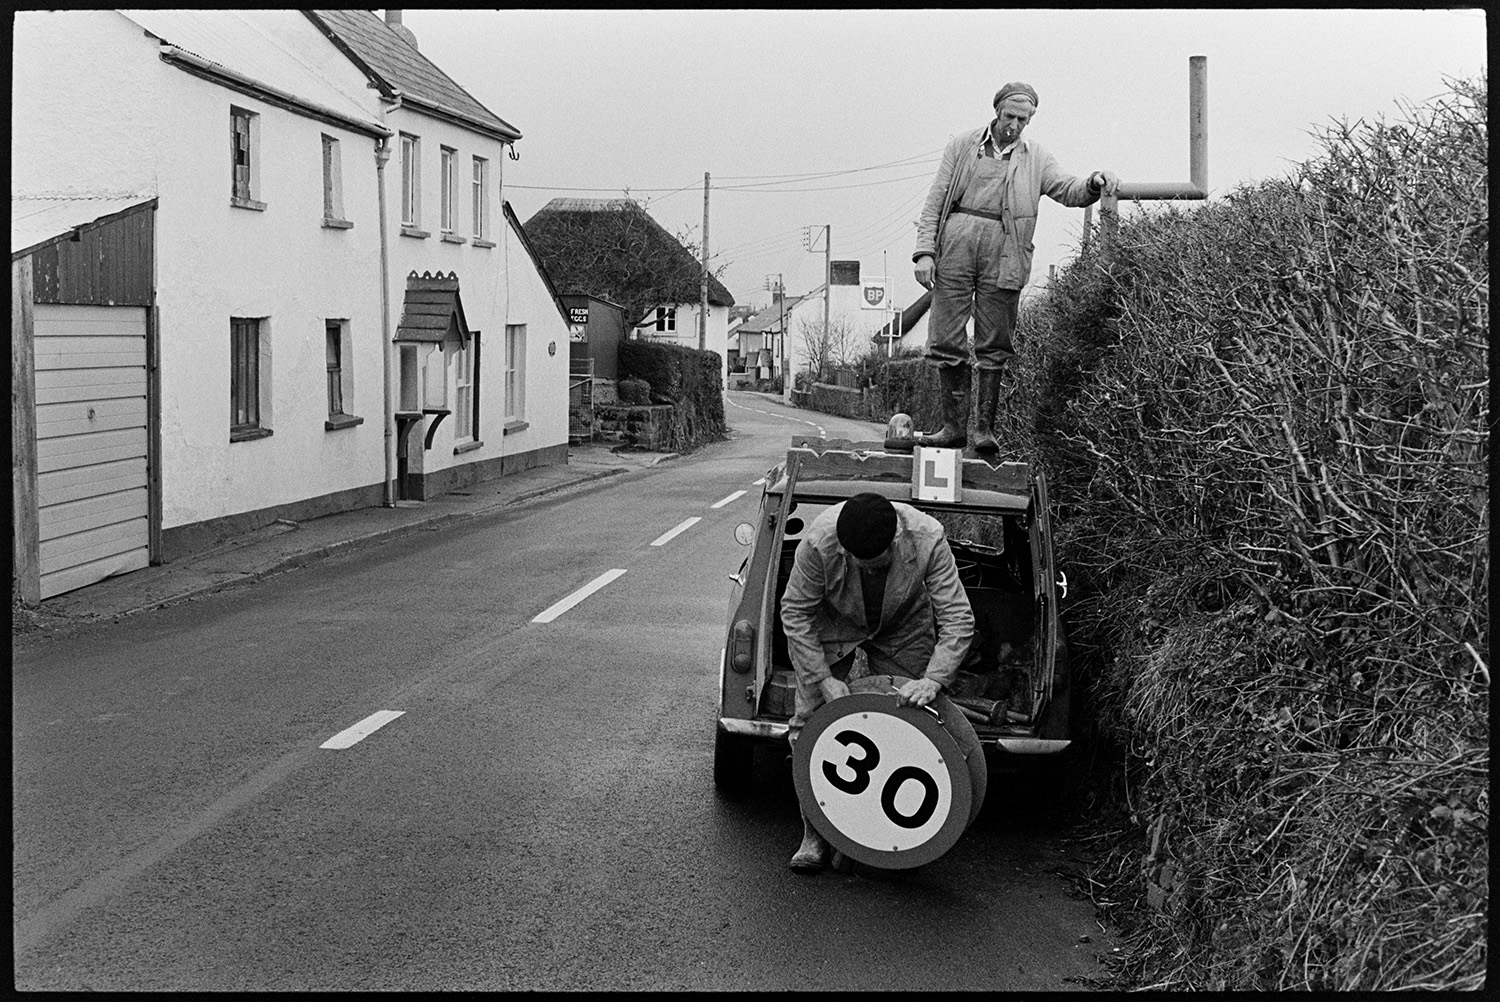 Men putting up 30 mph sign in hedge outside village. 
[Two men putting up a 30 mph road sign in a hedge in Beaford. One of the men is stood on top of a van to put up the sign. Houses can be seen in the background further along the street.]